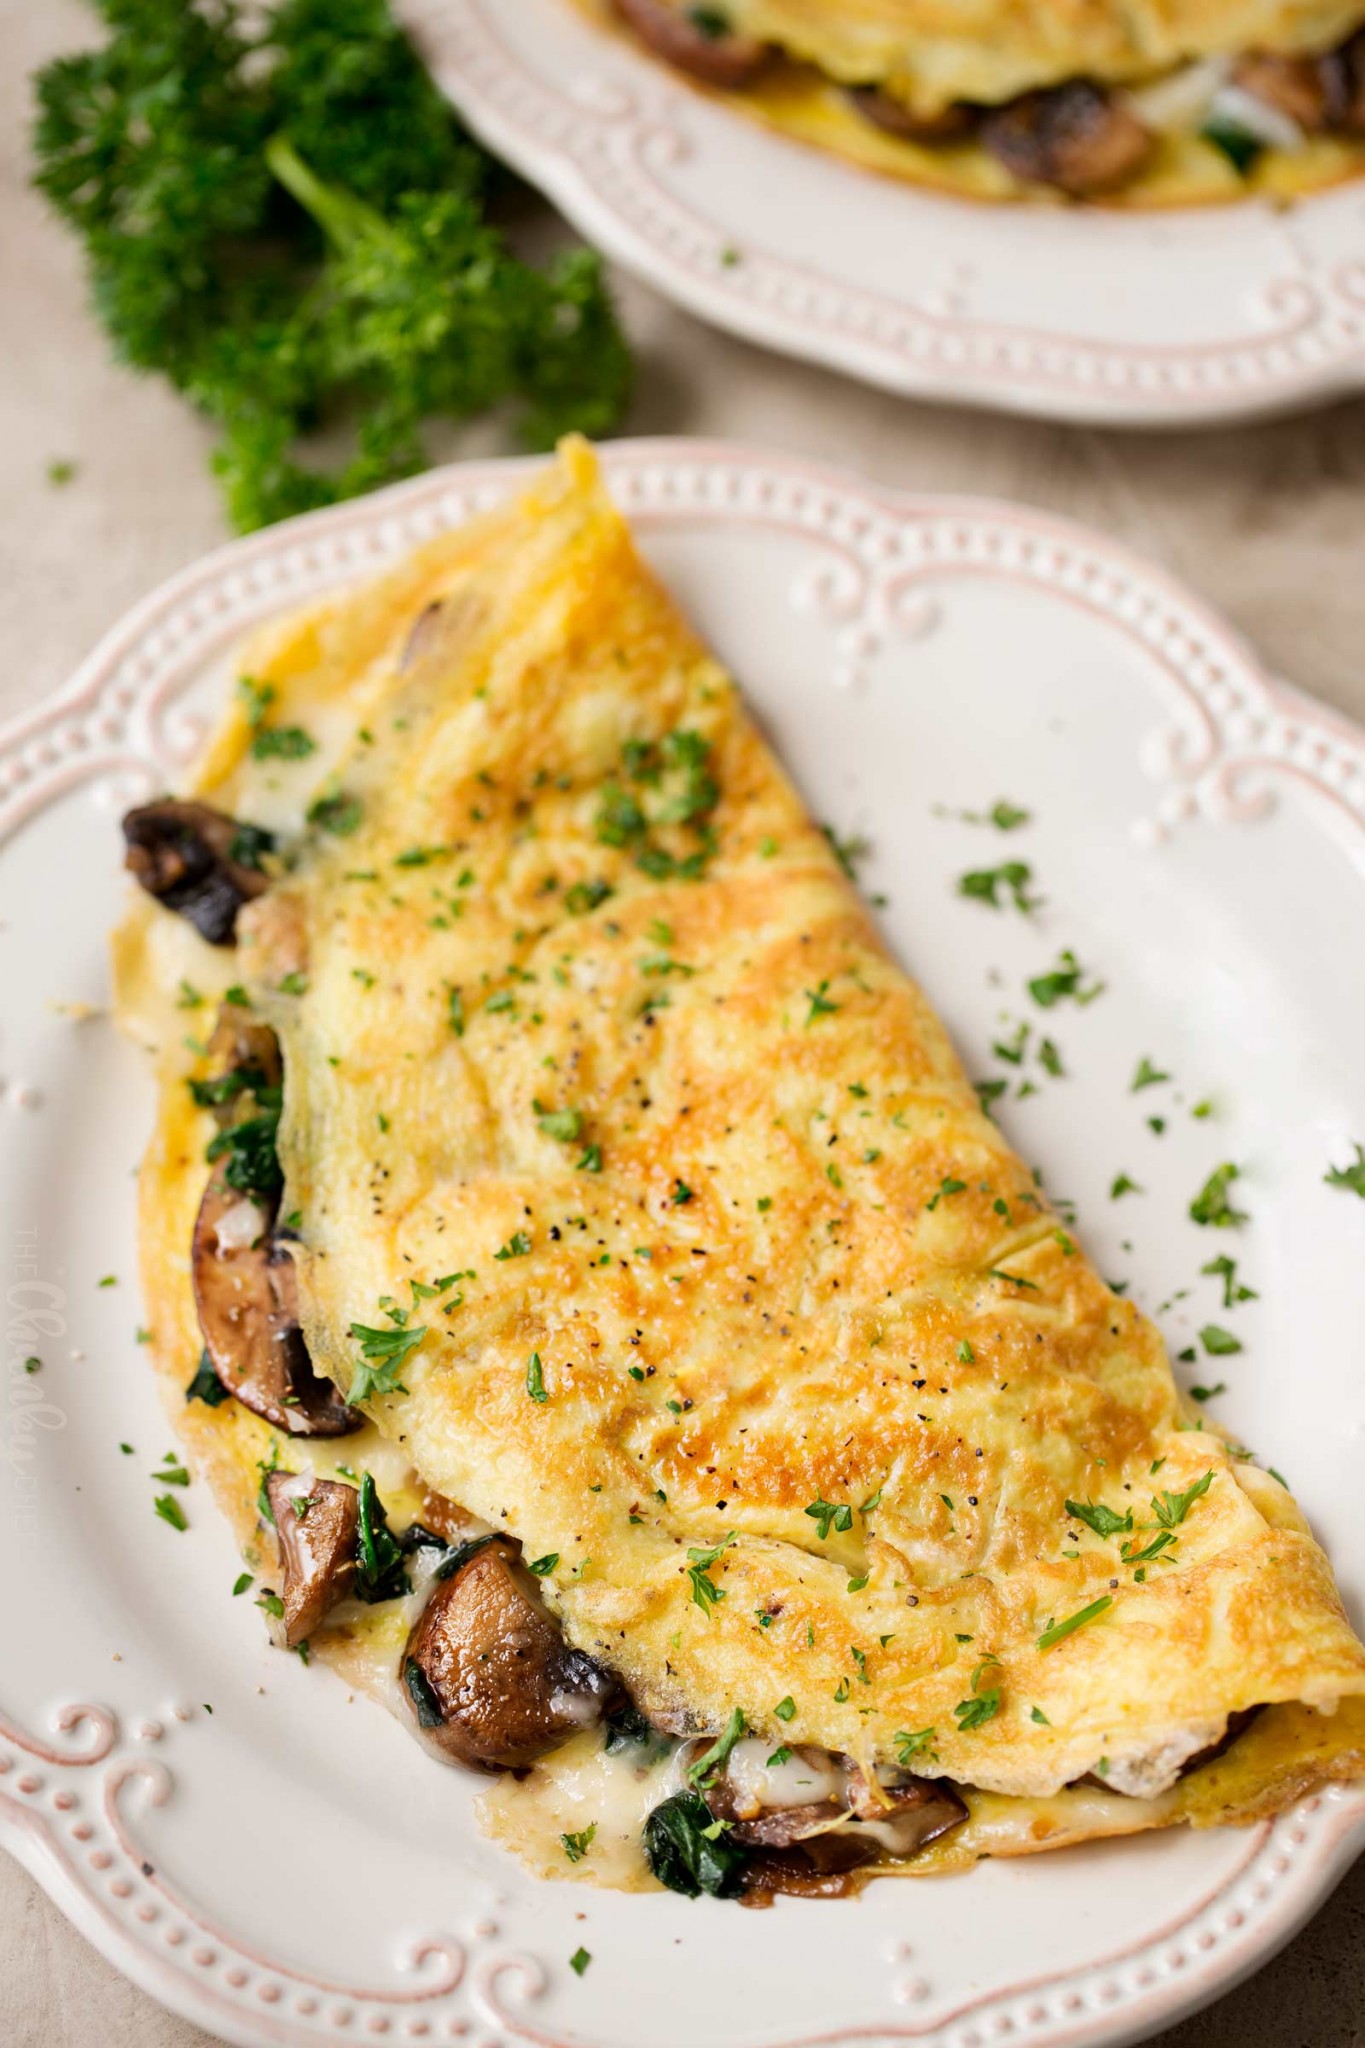 Cheesy Mushroom and Spinach Omelet - The Chunky Chef